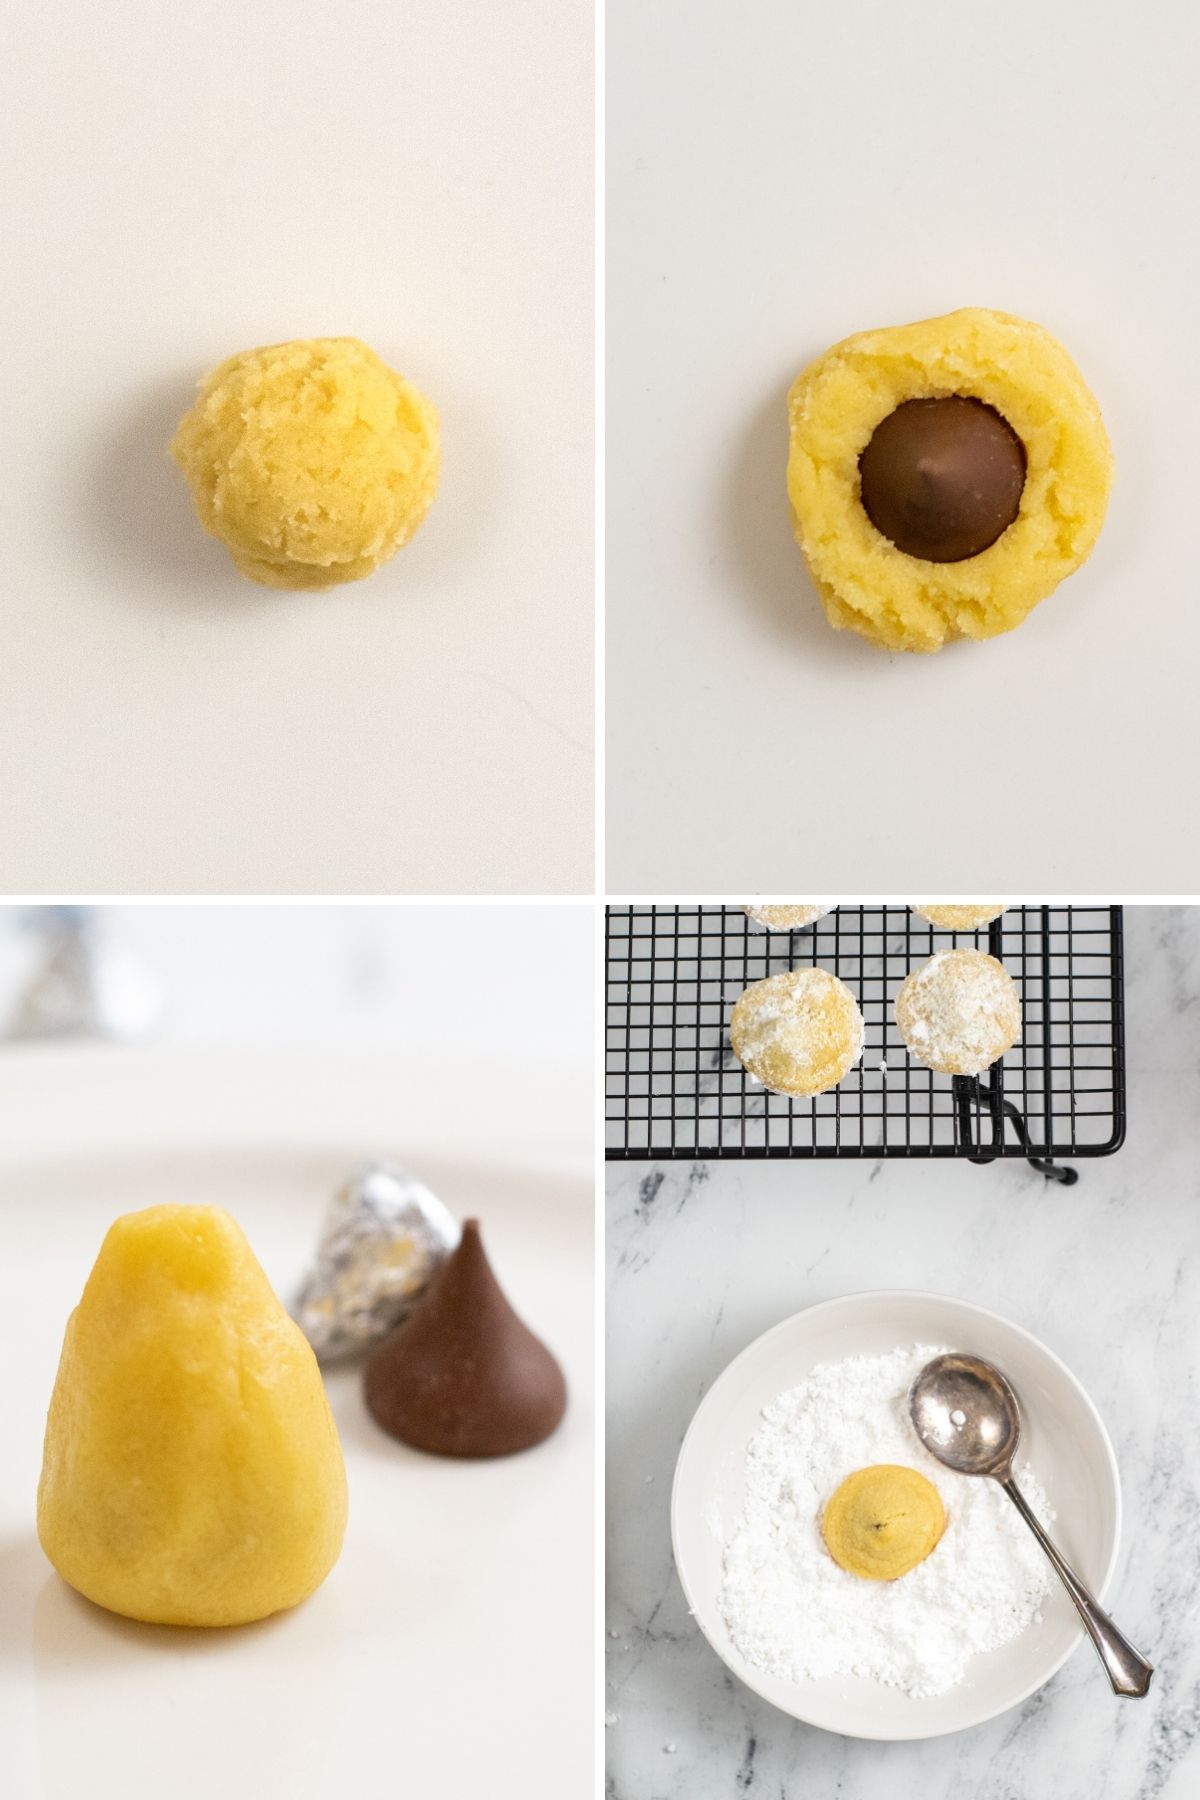 four photos showing the process: ball of cookie dough, Hershey's kiss in center of dough; dough covering Hershey's kiss; cooked cookies being dipped in powdered sugar